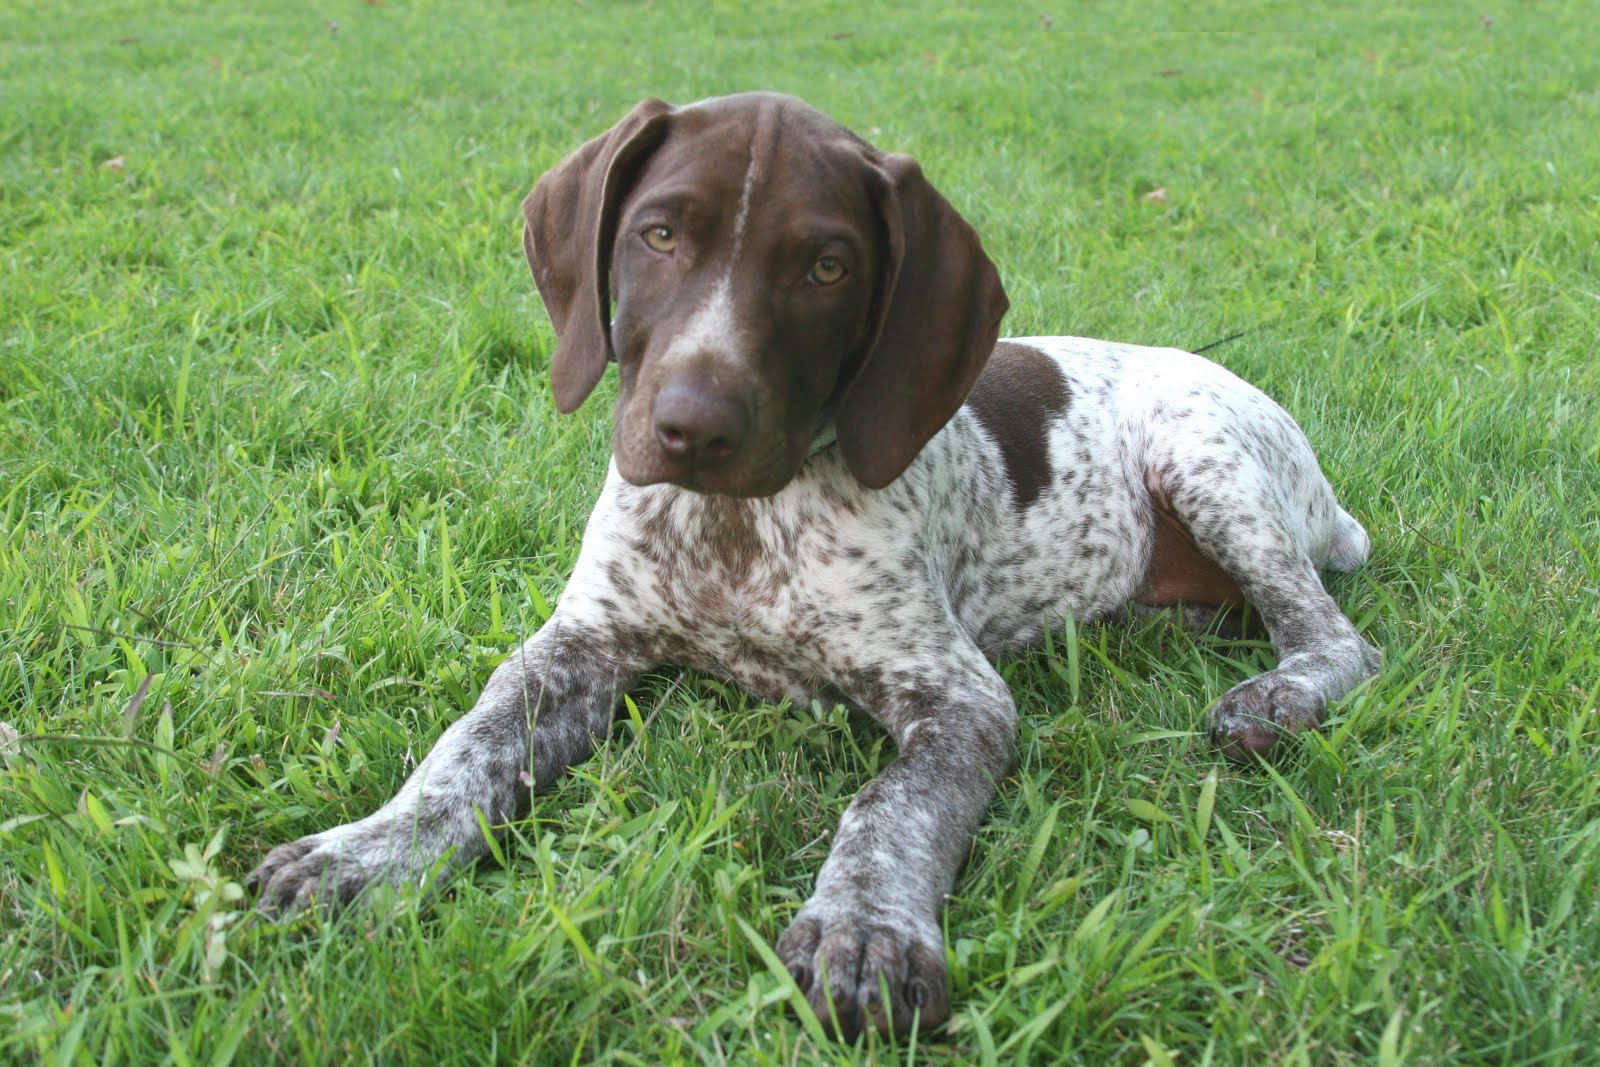 Small German Shorthaired Pointer photo and wallpaper. Beautiful Small German Shorthaired Pointer picture